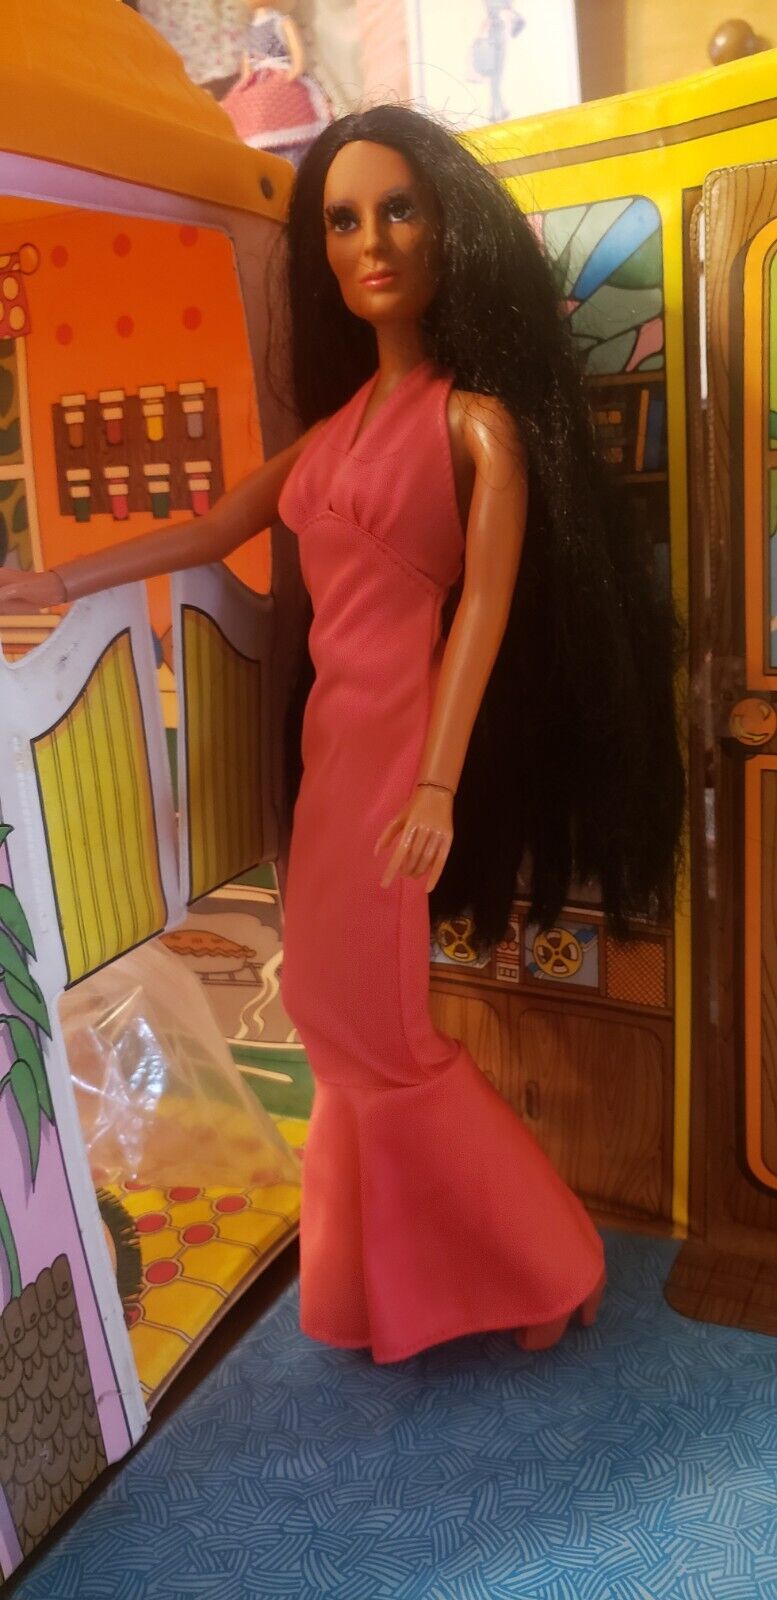 Vintage 1975 CHER Doll By Mego In Original Peachpink Gown and Shoes.